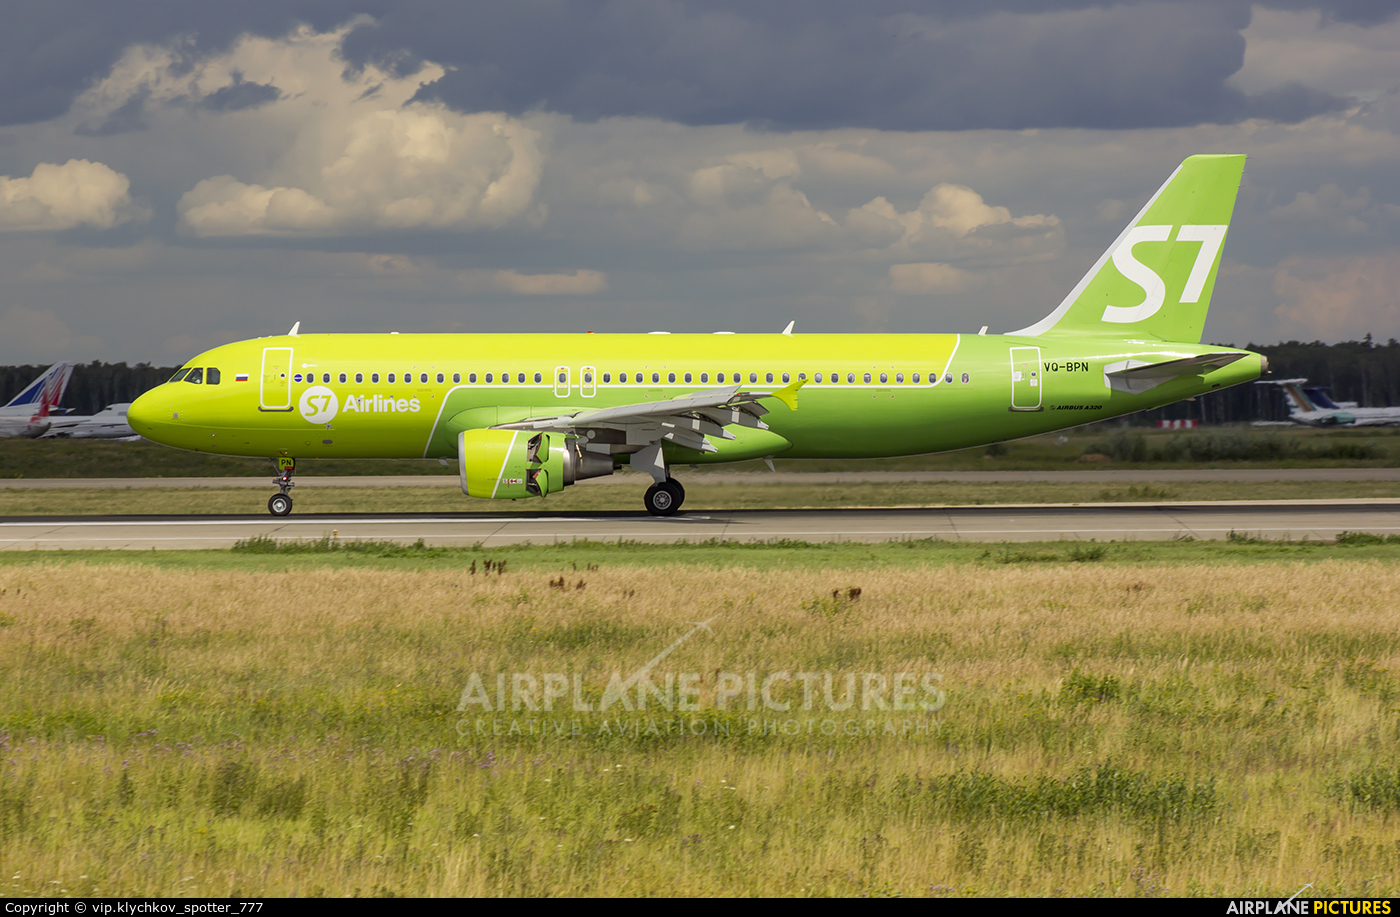 S7 Airlines VQ-BPN aircraft at Moscow - Domodedovo